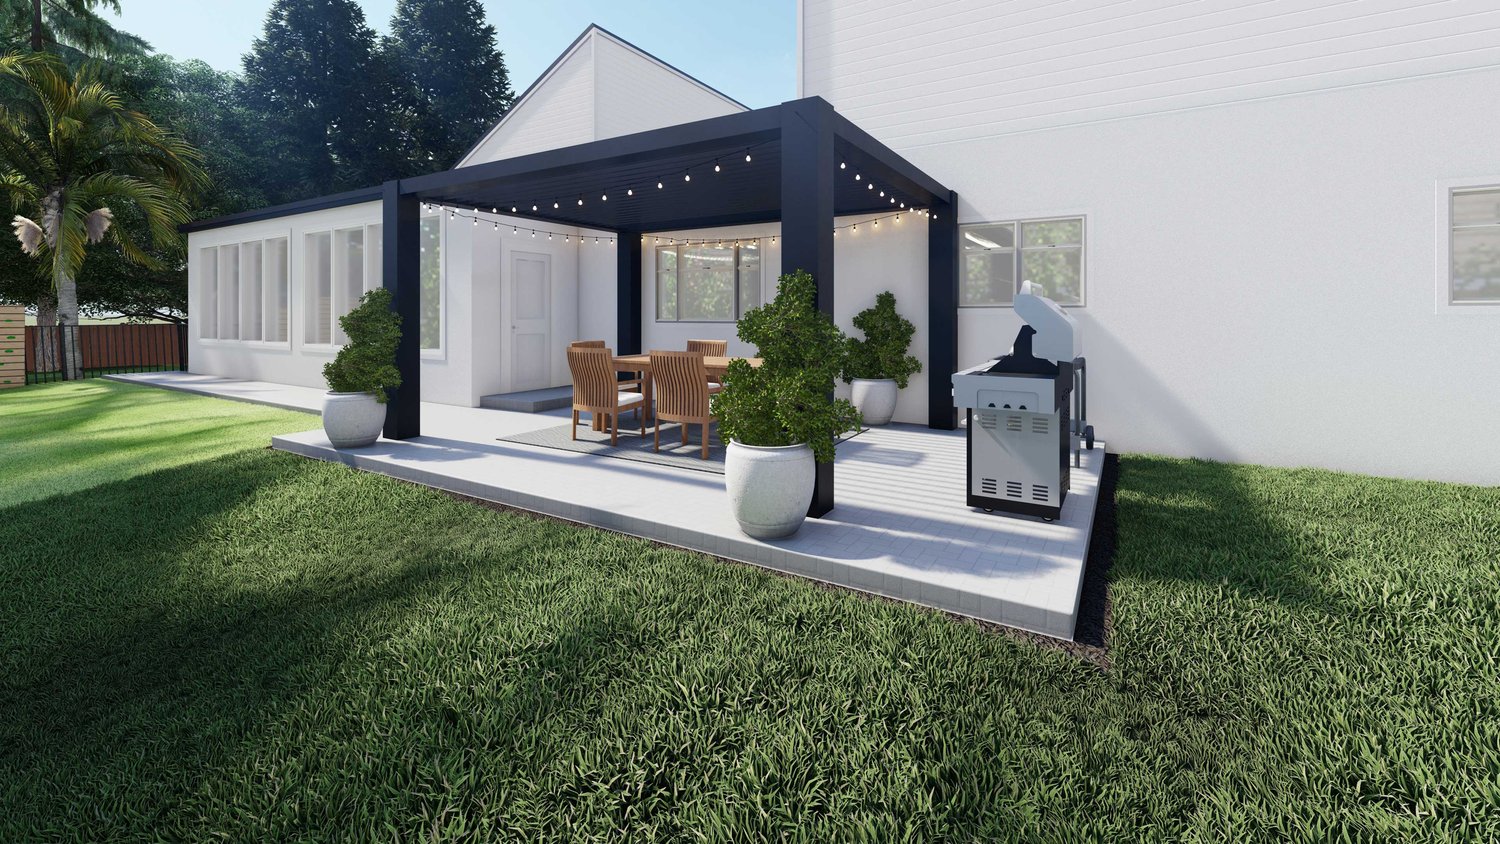 Tampa front yard patio with outdoor kitchen and pergola over dining area